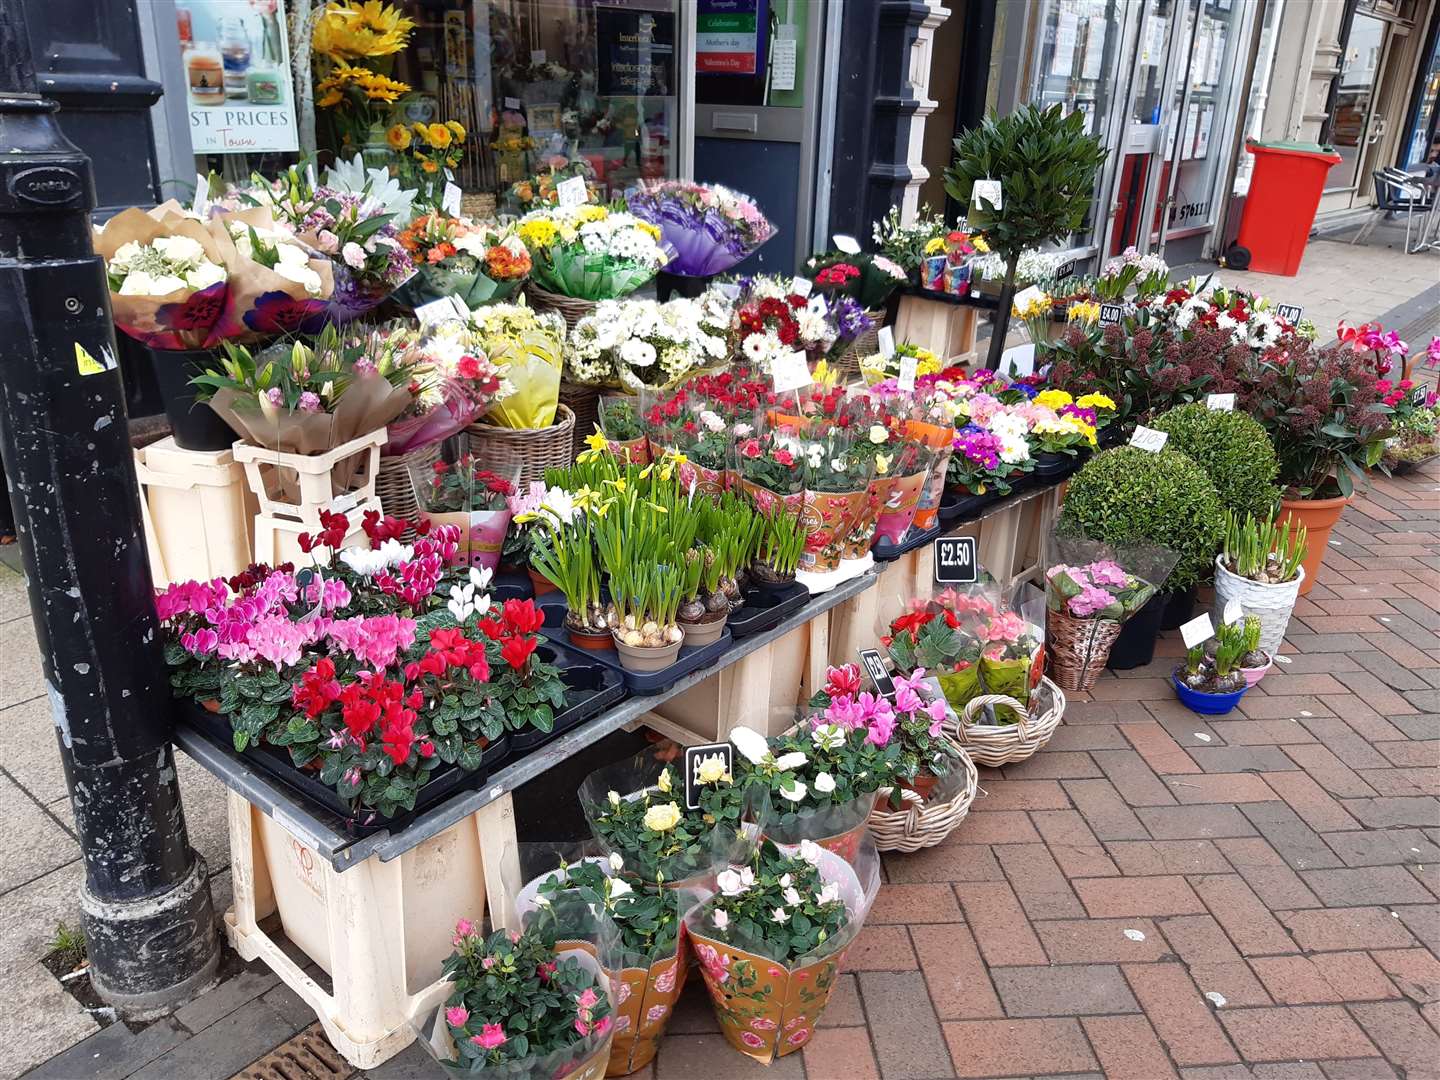 Mr. Flowers with flowers in plastic wrapping, High Street, Gillingham